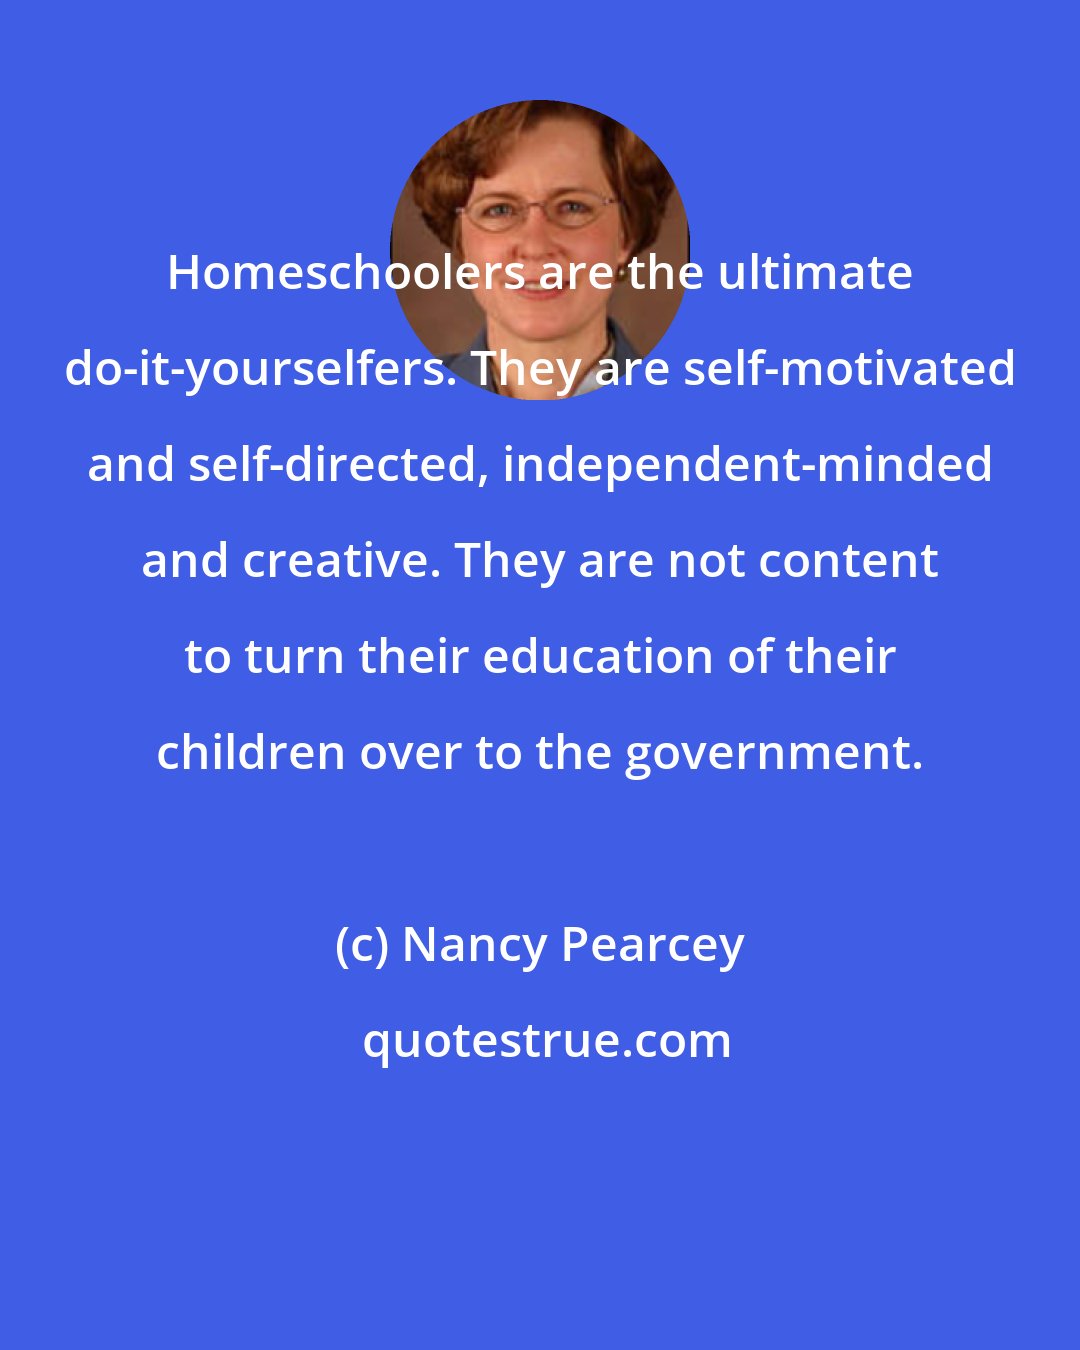 Nancy Pearcey: Homeschoolers are the ultimate do-it-yourselfers. They are self-motivated and self-directed, independent-minded and creative. They are not content to turn their education of their children over to the government.